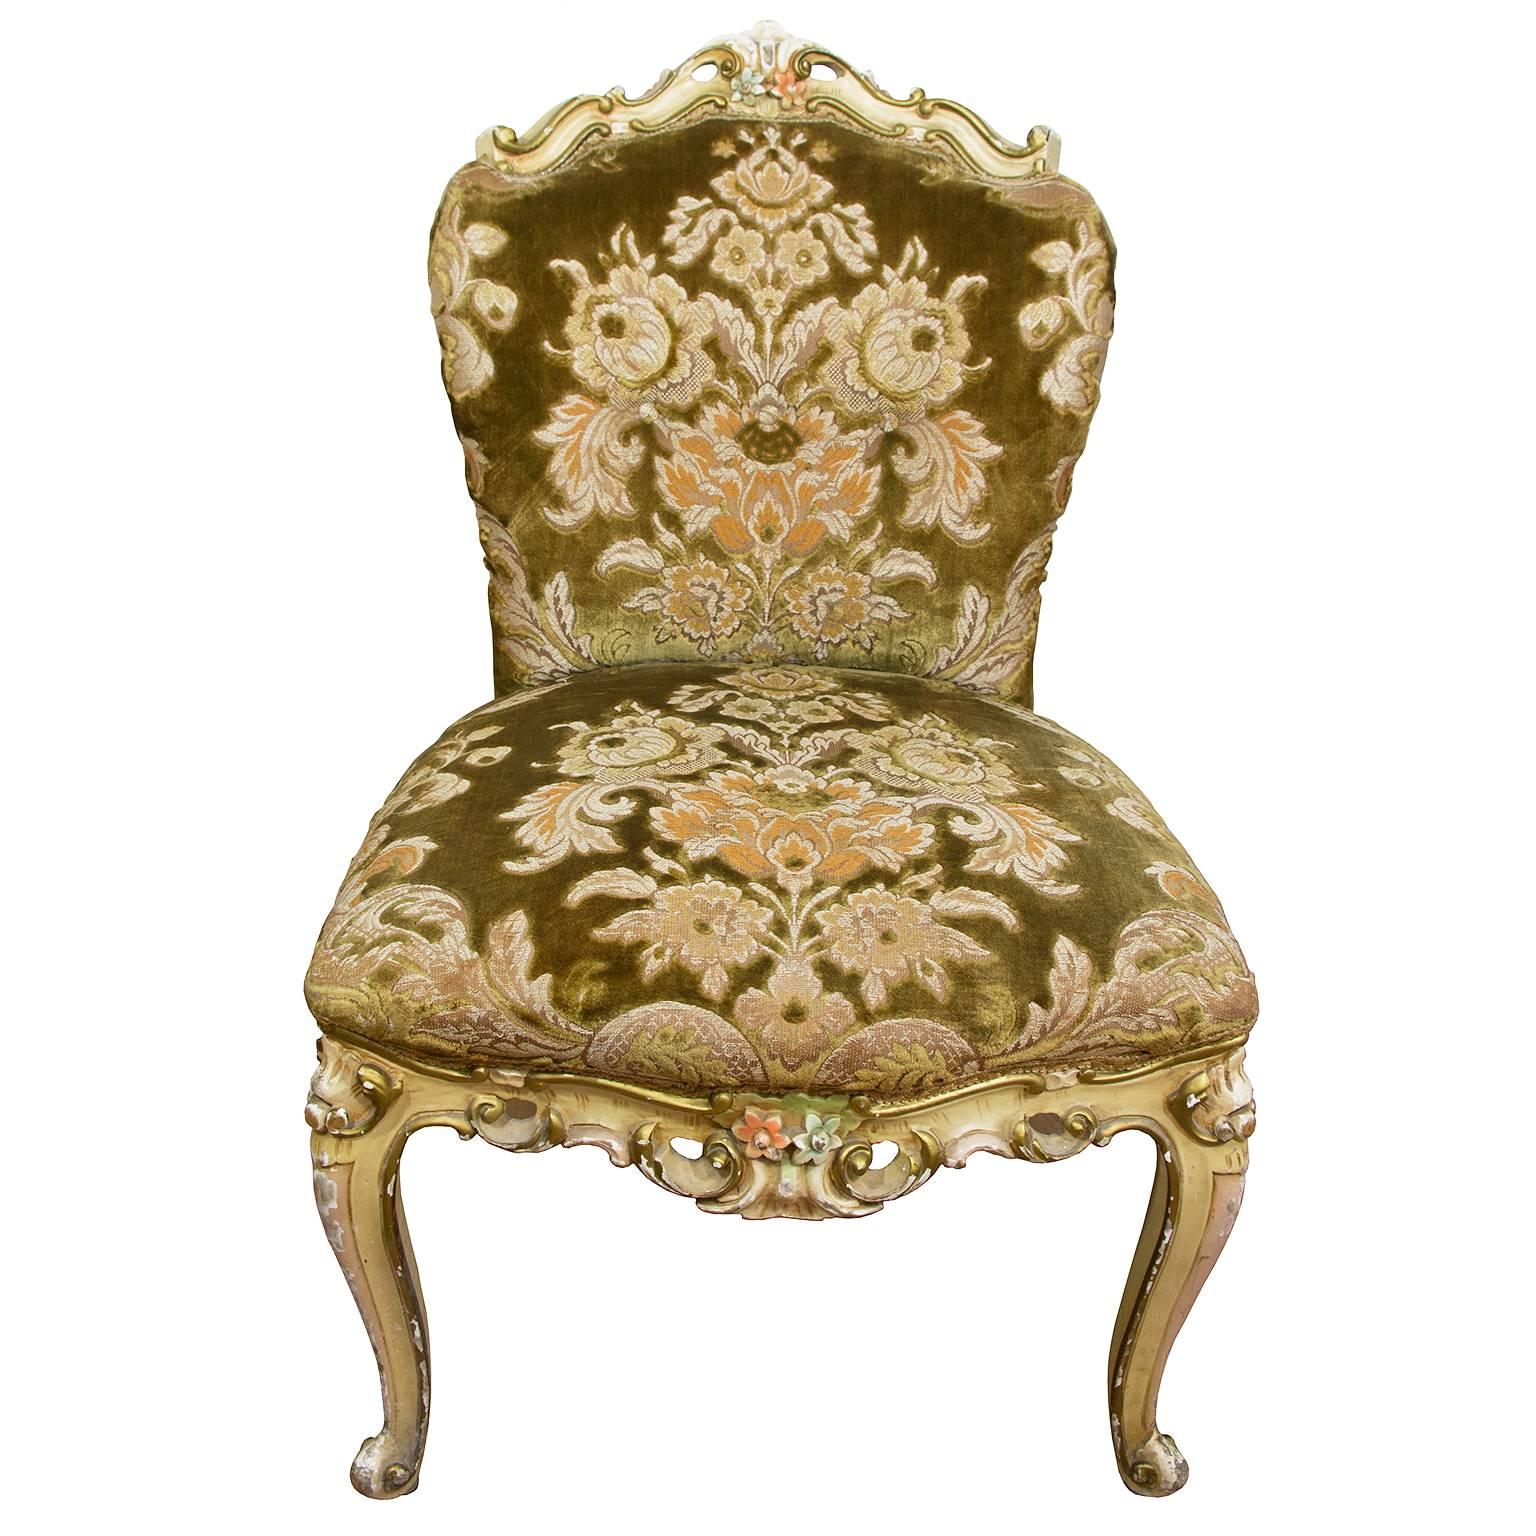 Beautiful 19th century antique painted and gilded wood Italian accent chair / slipper chair.
Very good condition, with minor age defects (please see photos).

Measurements:
Full height: 85 cm / 34 inches.
Width: 53 cm / 21 inches.
Depth: 41 cm